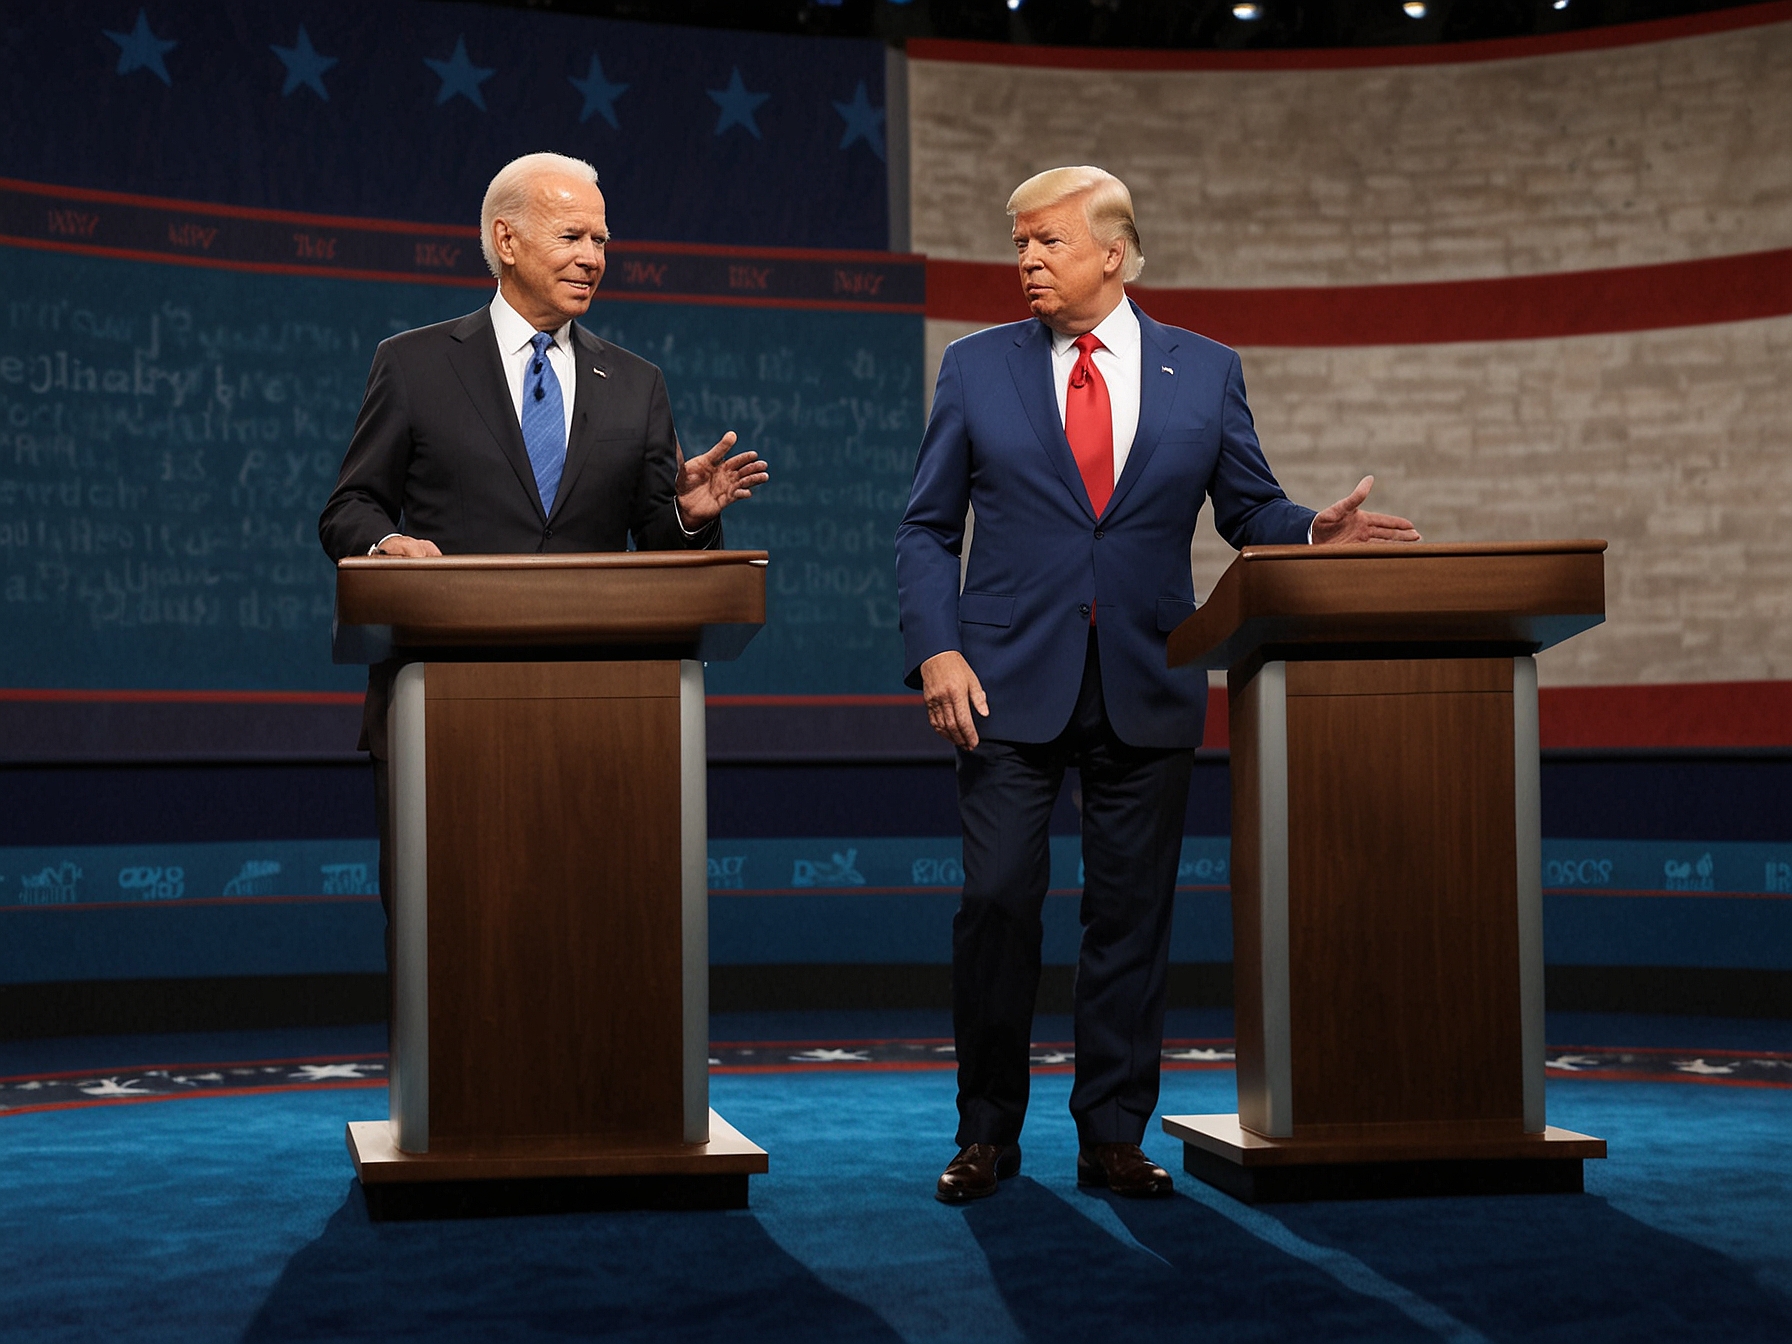 Illustration shows President Joe Biden and former President Donald Trump on stage during the 2024 presidential debate, highlighting the contrasting visions for America's future.